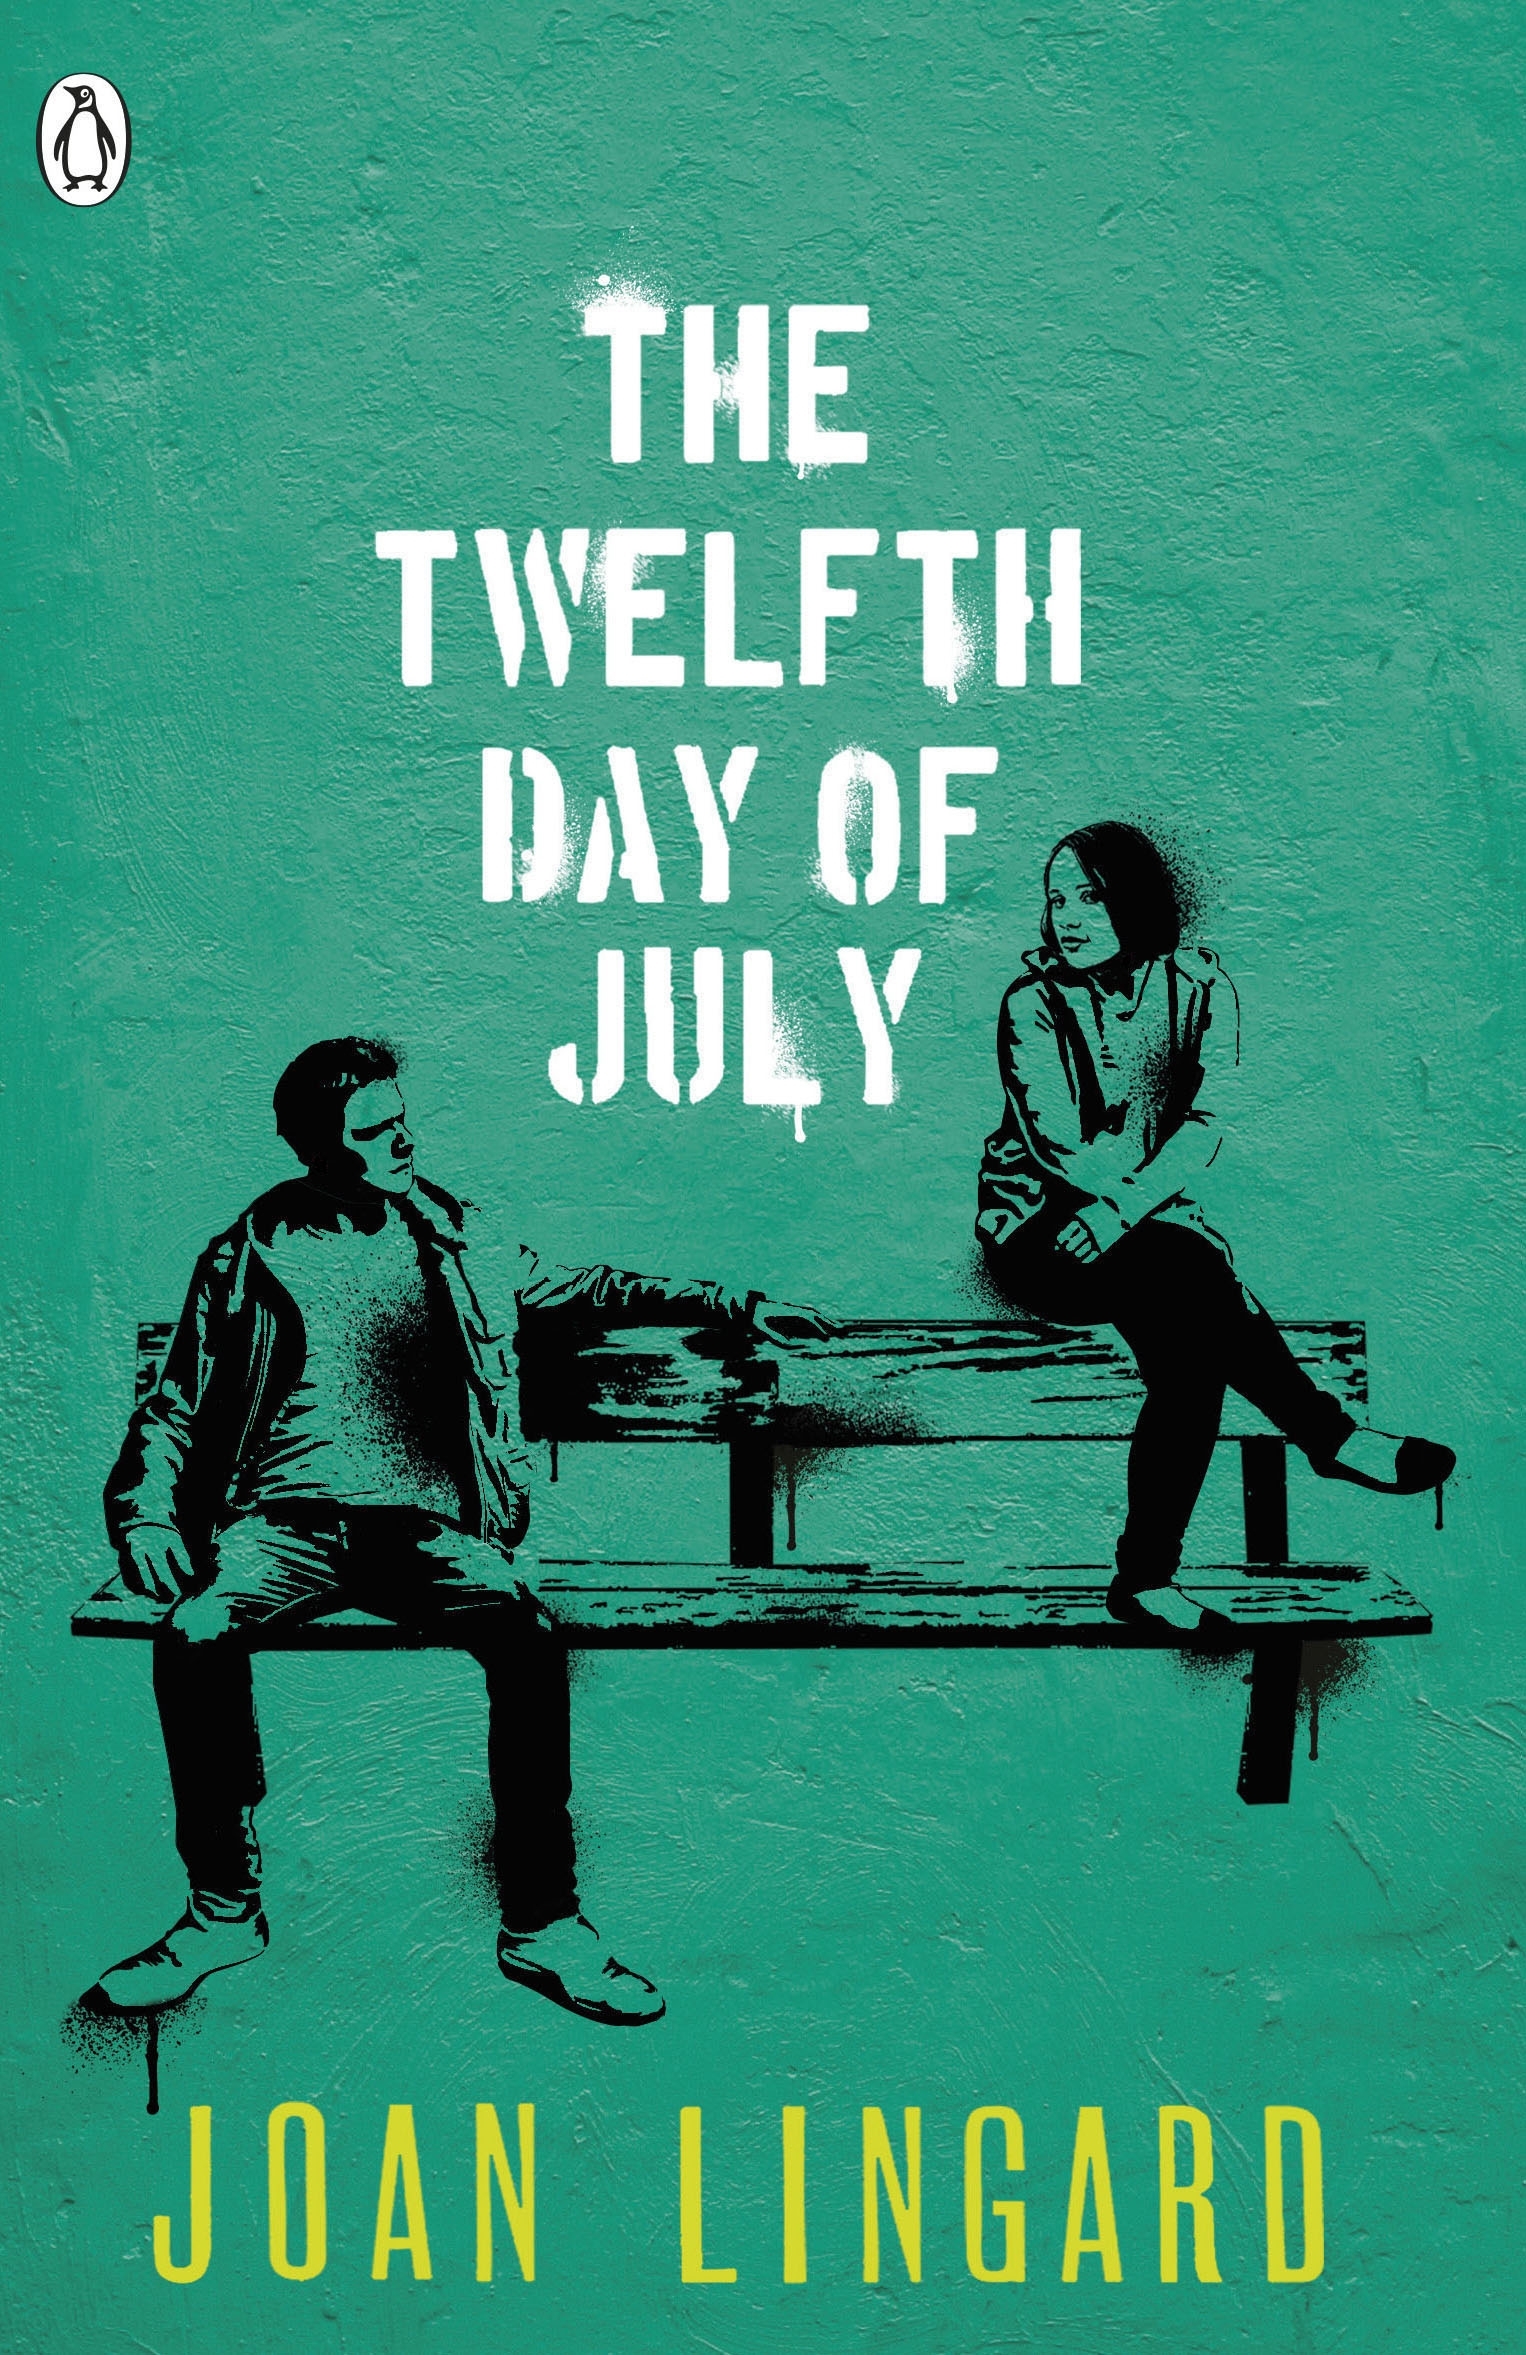 The Twelfth Day of July by Joan Lingard Penguin Books Australia